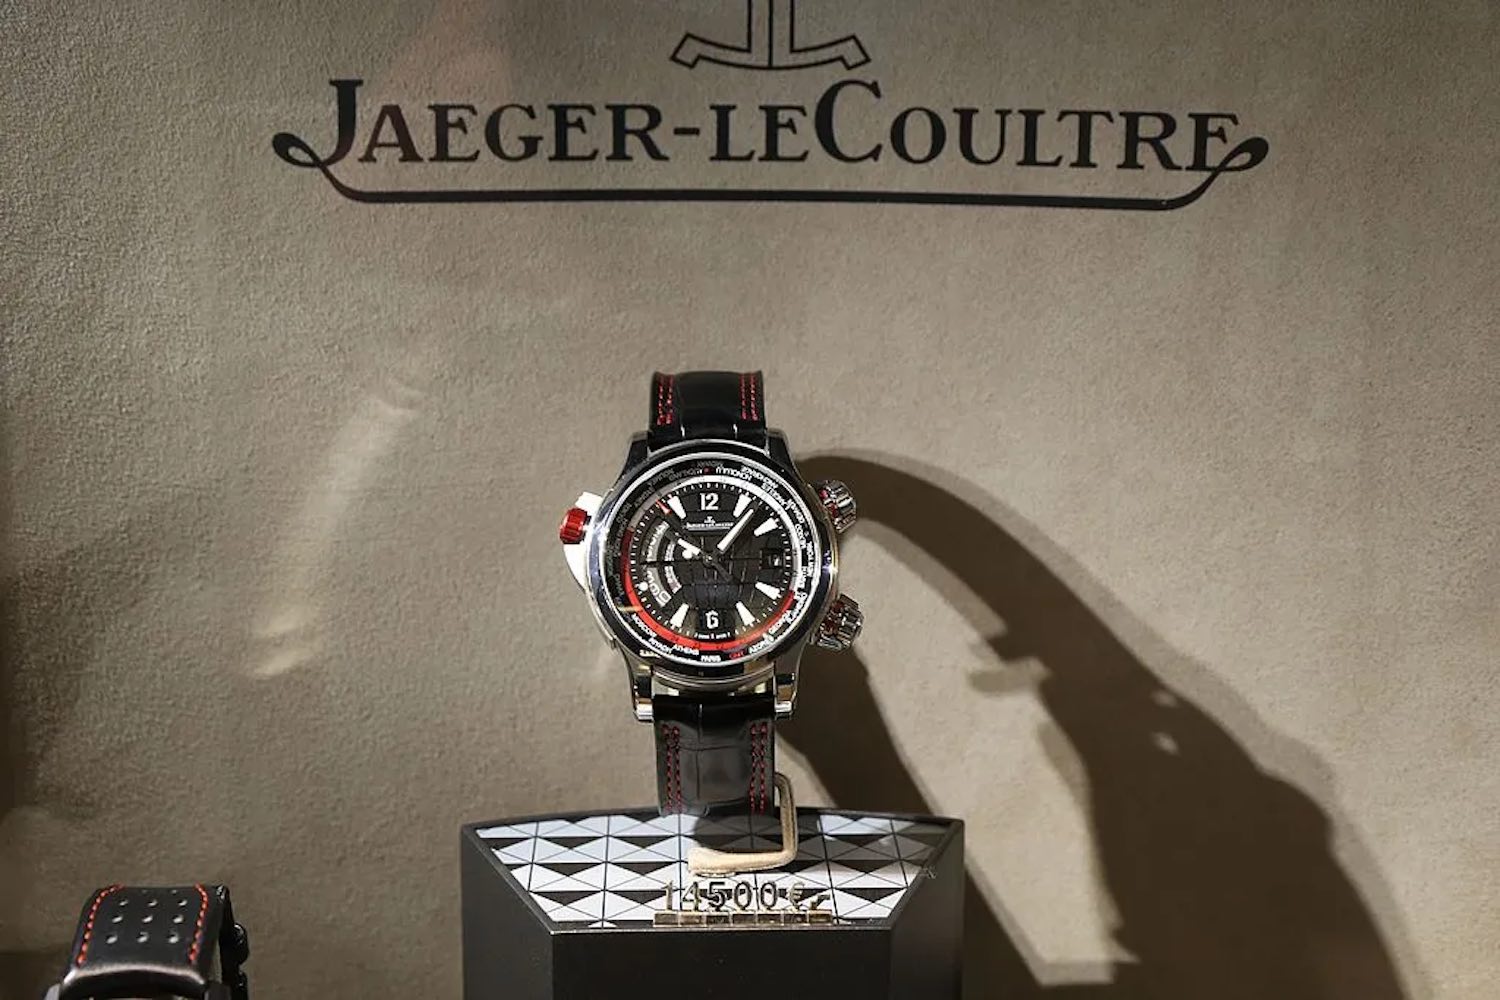 An Aston Martin series watch on display beneath a Jaeger-LeCoultre sign.